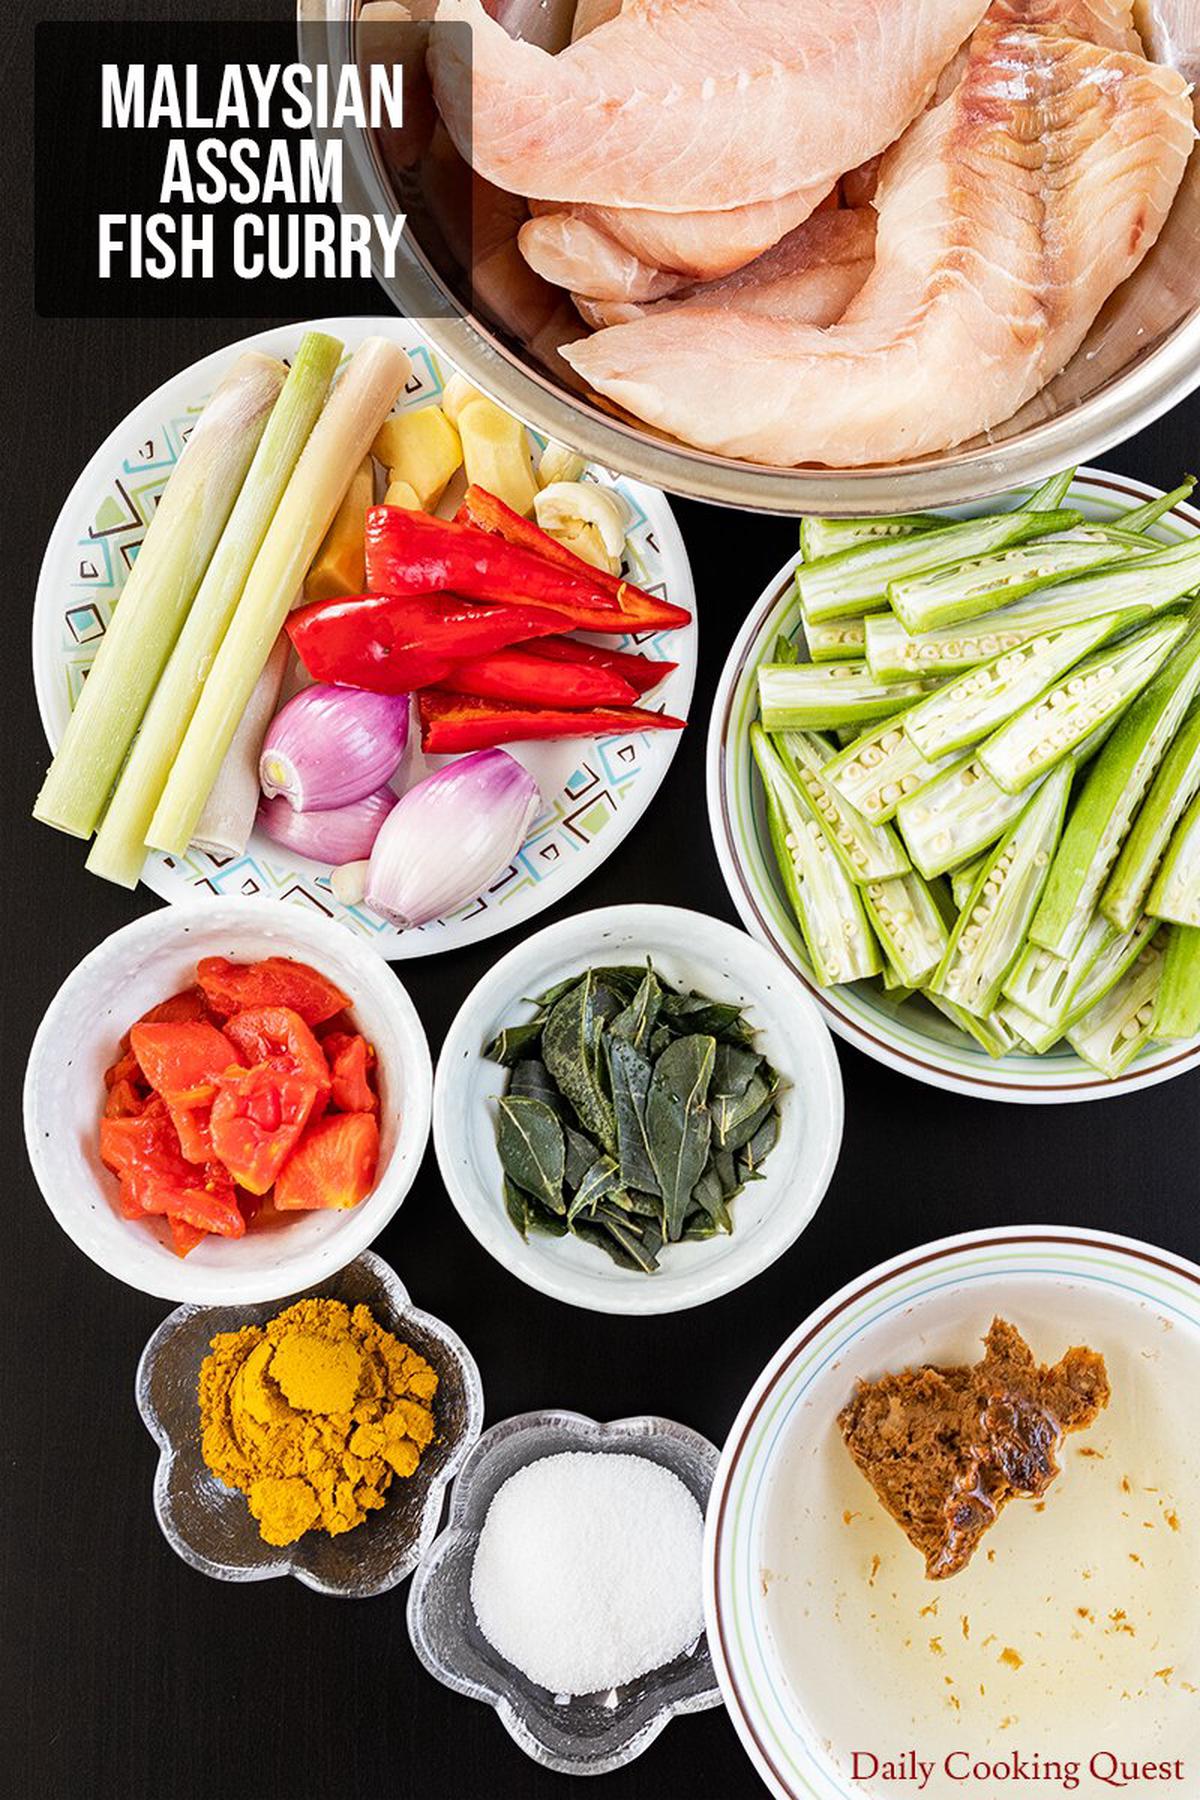 Ingredients to Prepare Malaysian Assam Fish Curry.